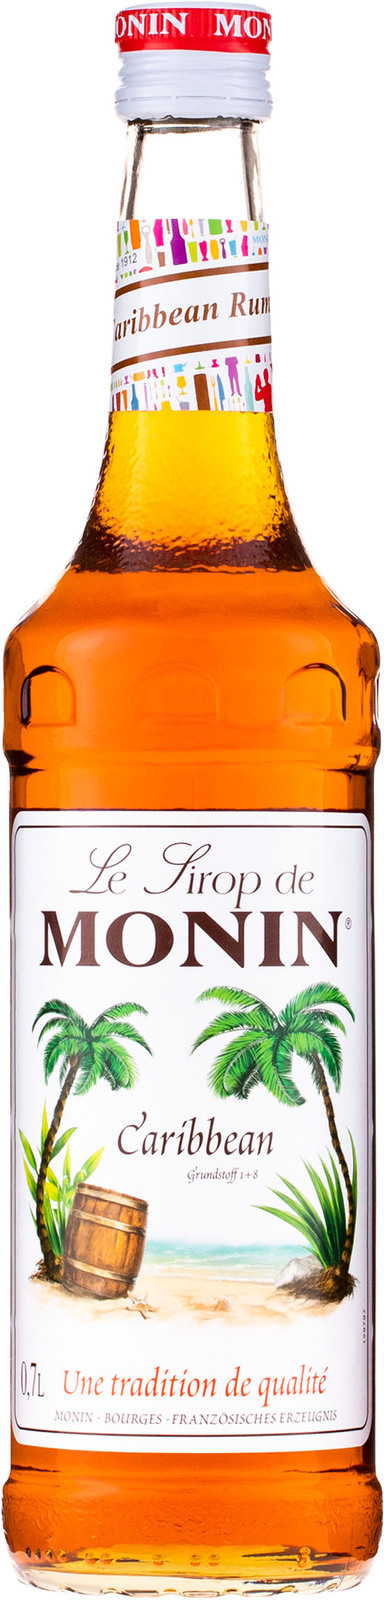 Monin Caribbean Syrup 1Ltr bottle with Bright amber color from Saudi Supplier.